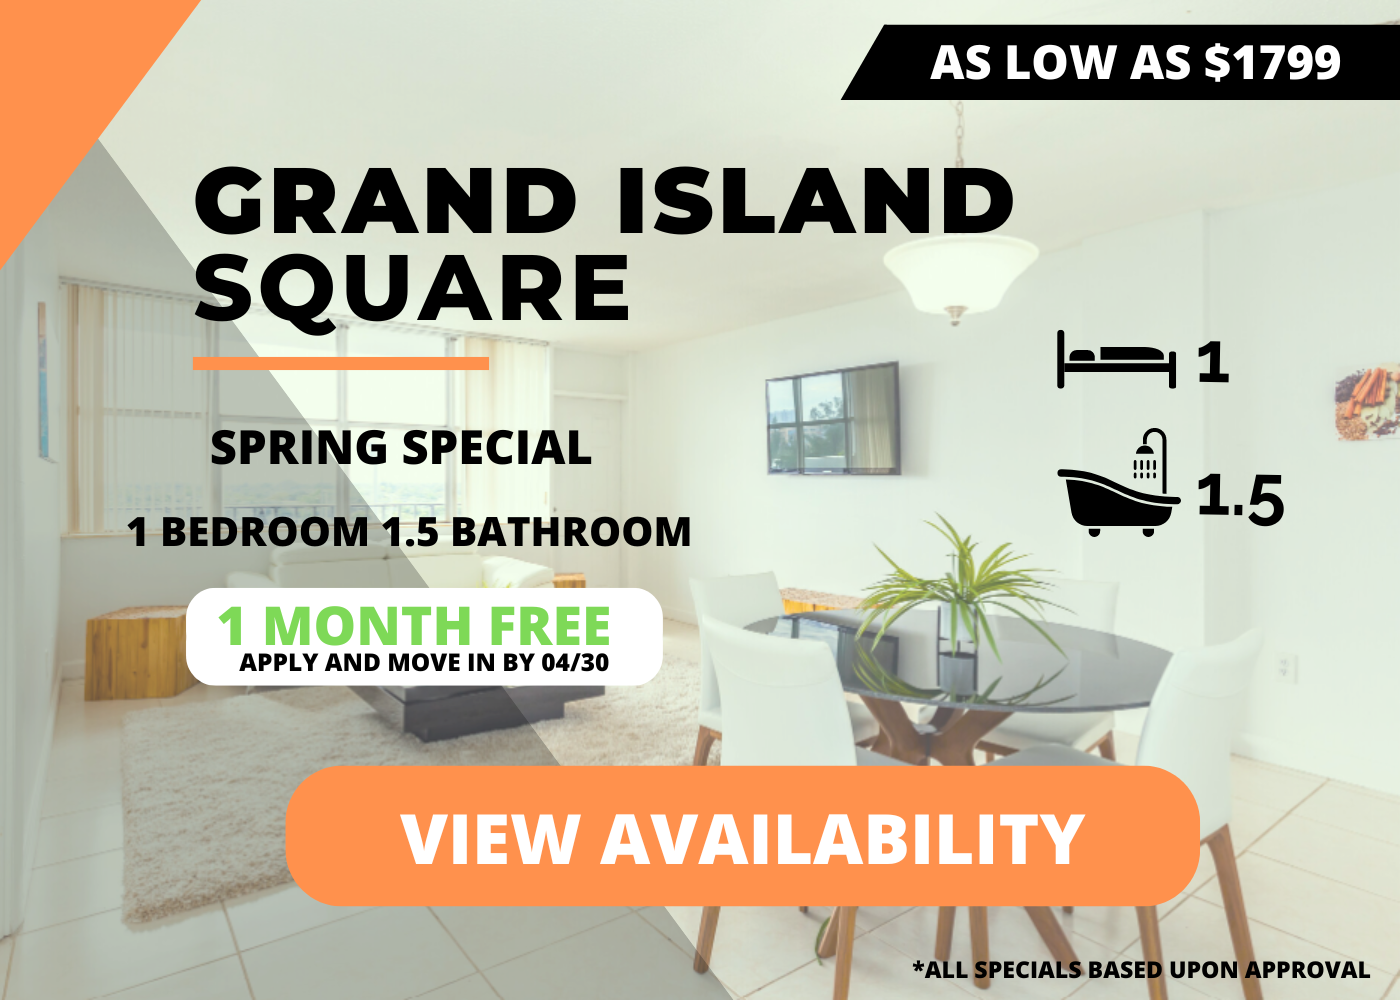 Spring Special – One Bedroom and One and half Bathroom Apartments as low as $1799! One Month Free – Apply and Move in by April 30